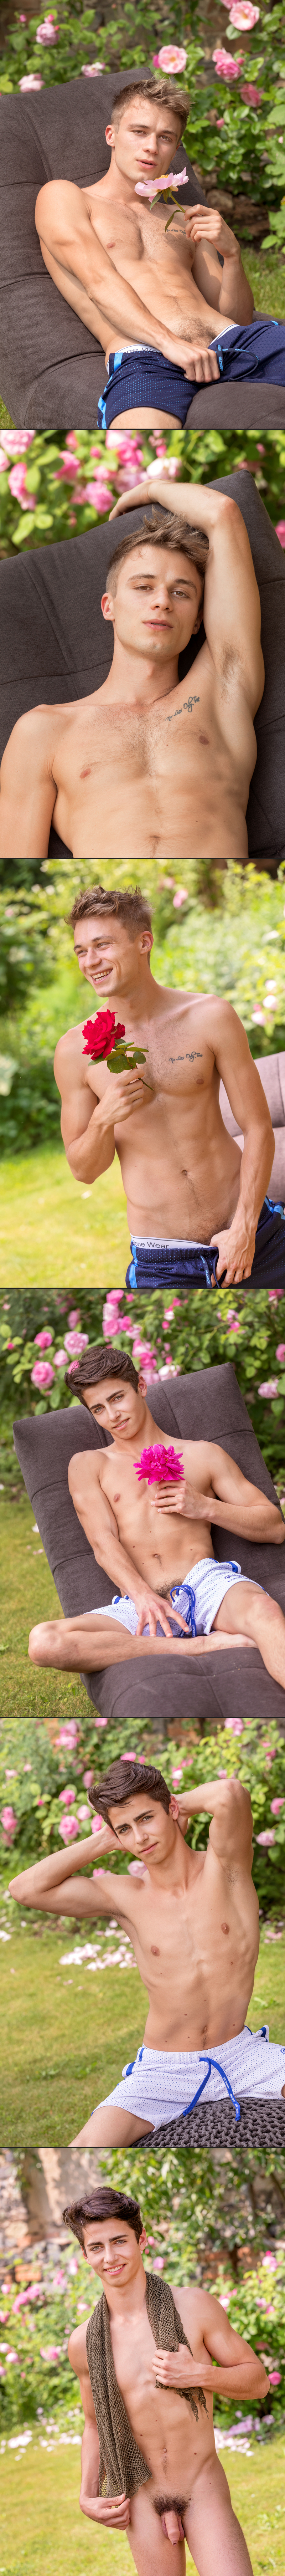 Jamie Durrell & Ayden Mallory [Models of the Week] at BelAmiOnline